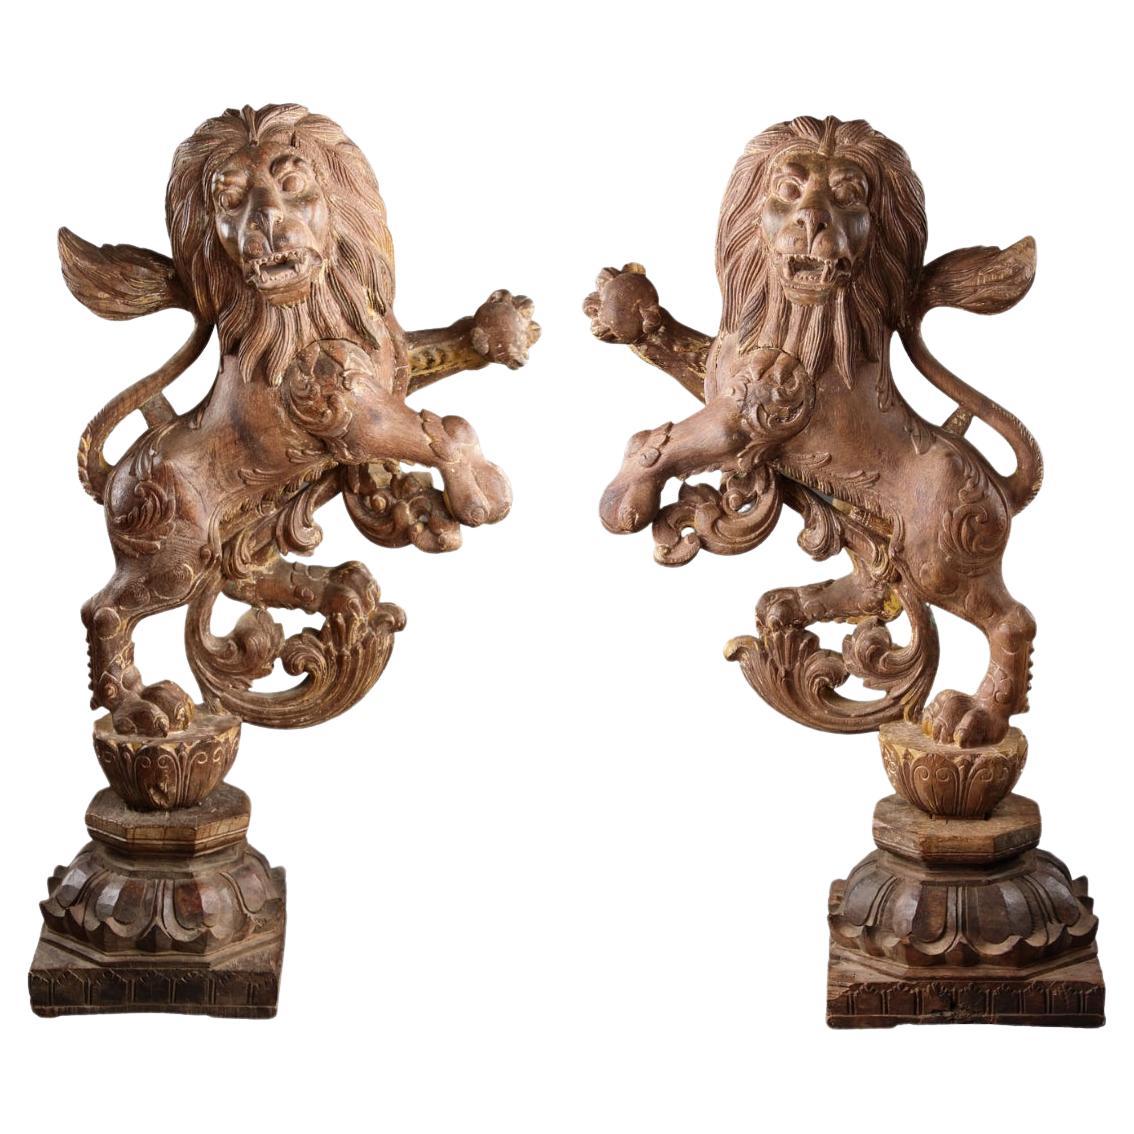 A Fine and Decorative Pair of Rampant Lions